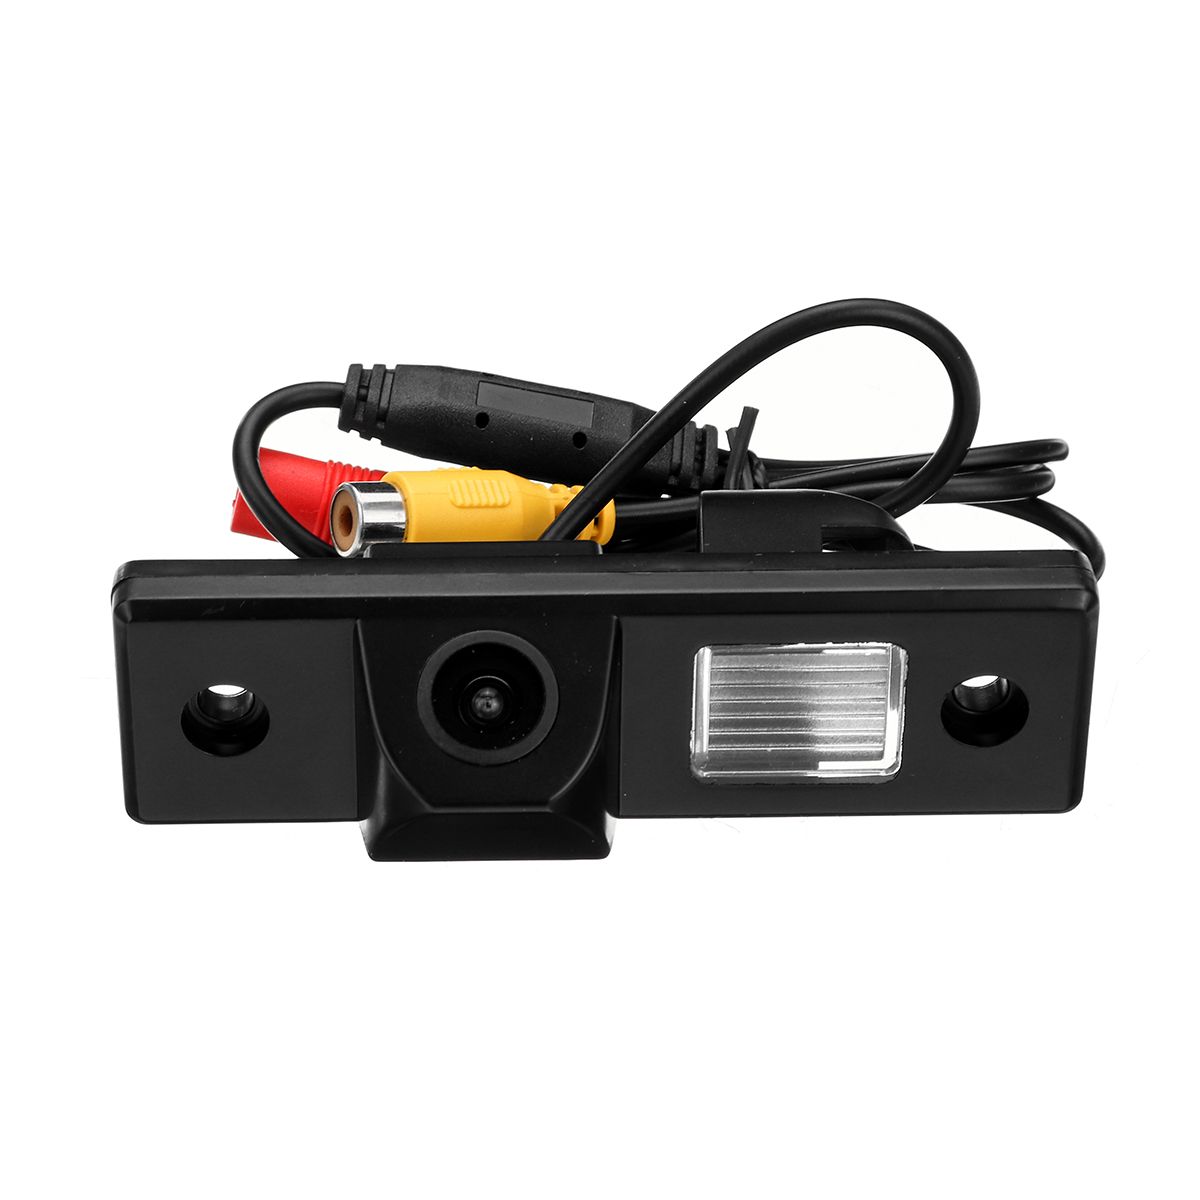 170-Degrees-Car-Rearview-Camera-CCD-Sensor-Night-Vision-System-Kit-Fits-For-Chevy-Cruze-1709127